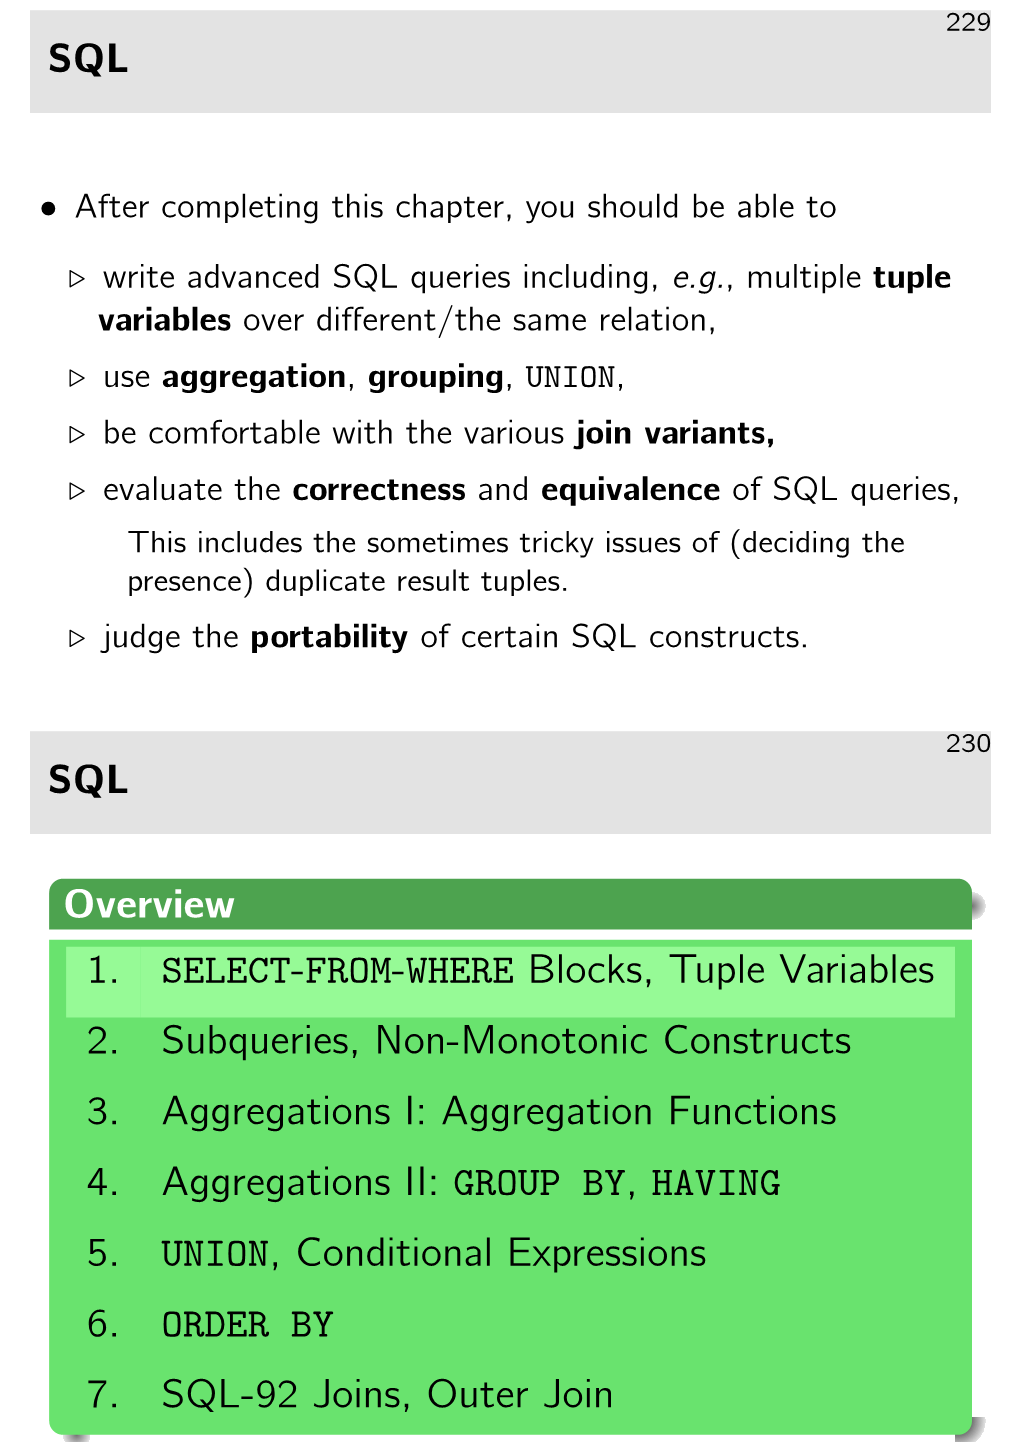 SQL SQL Overview 1. SELECT-FROM-WHERE Blocks